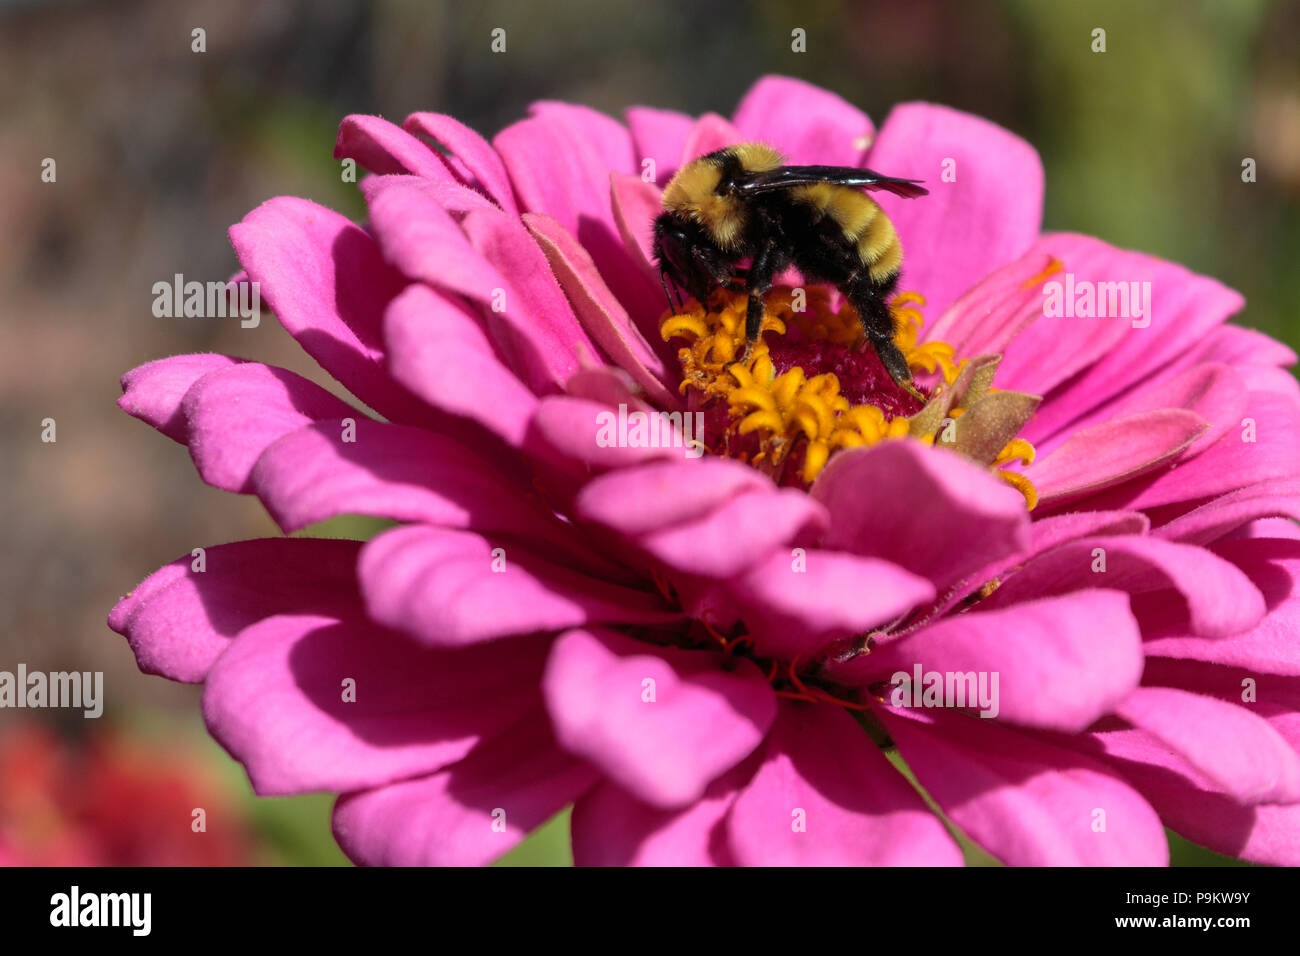 A bumblebee feeding busily on a brilliant pink zinnia flowers fuzzy open florets Stock Photo